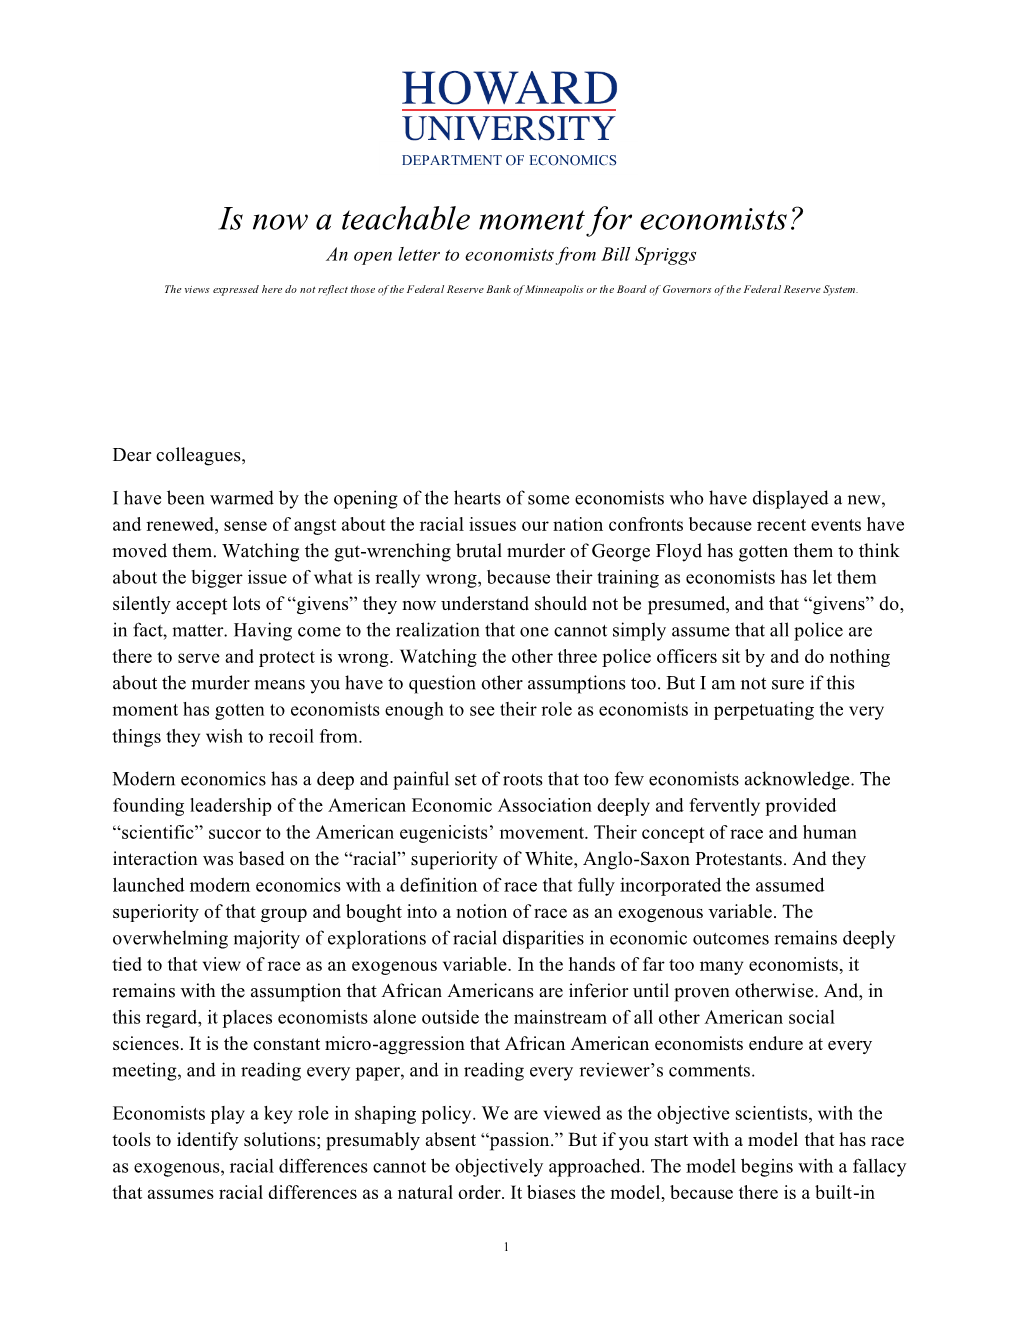 Is Now a Teachable Moment for Economists? an Open Letter to Economists from Bill Spriggs